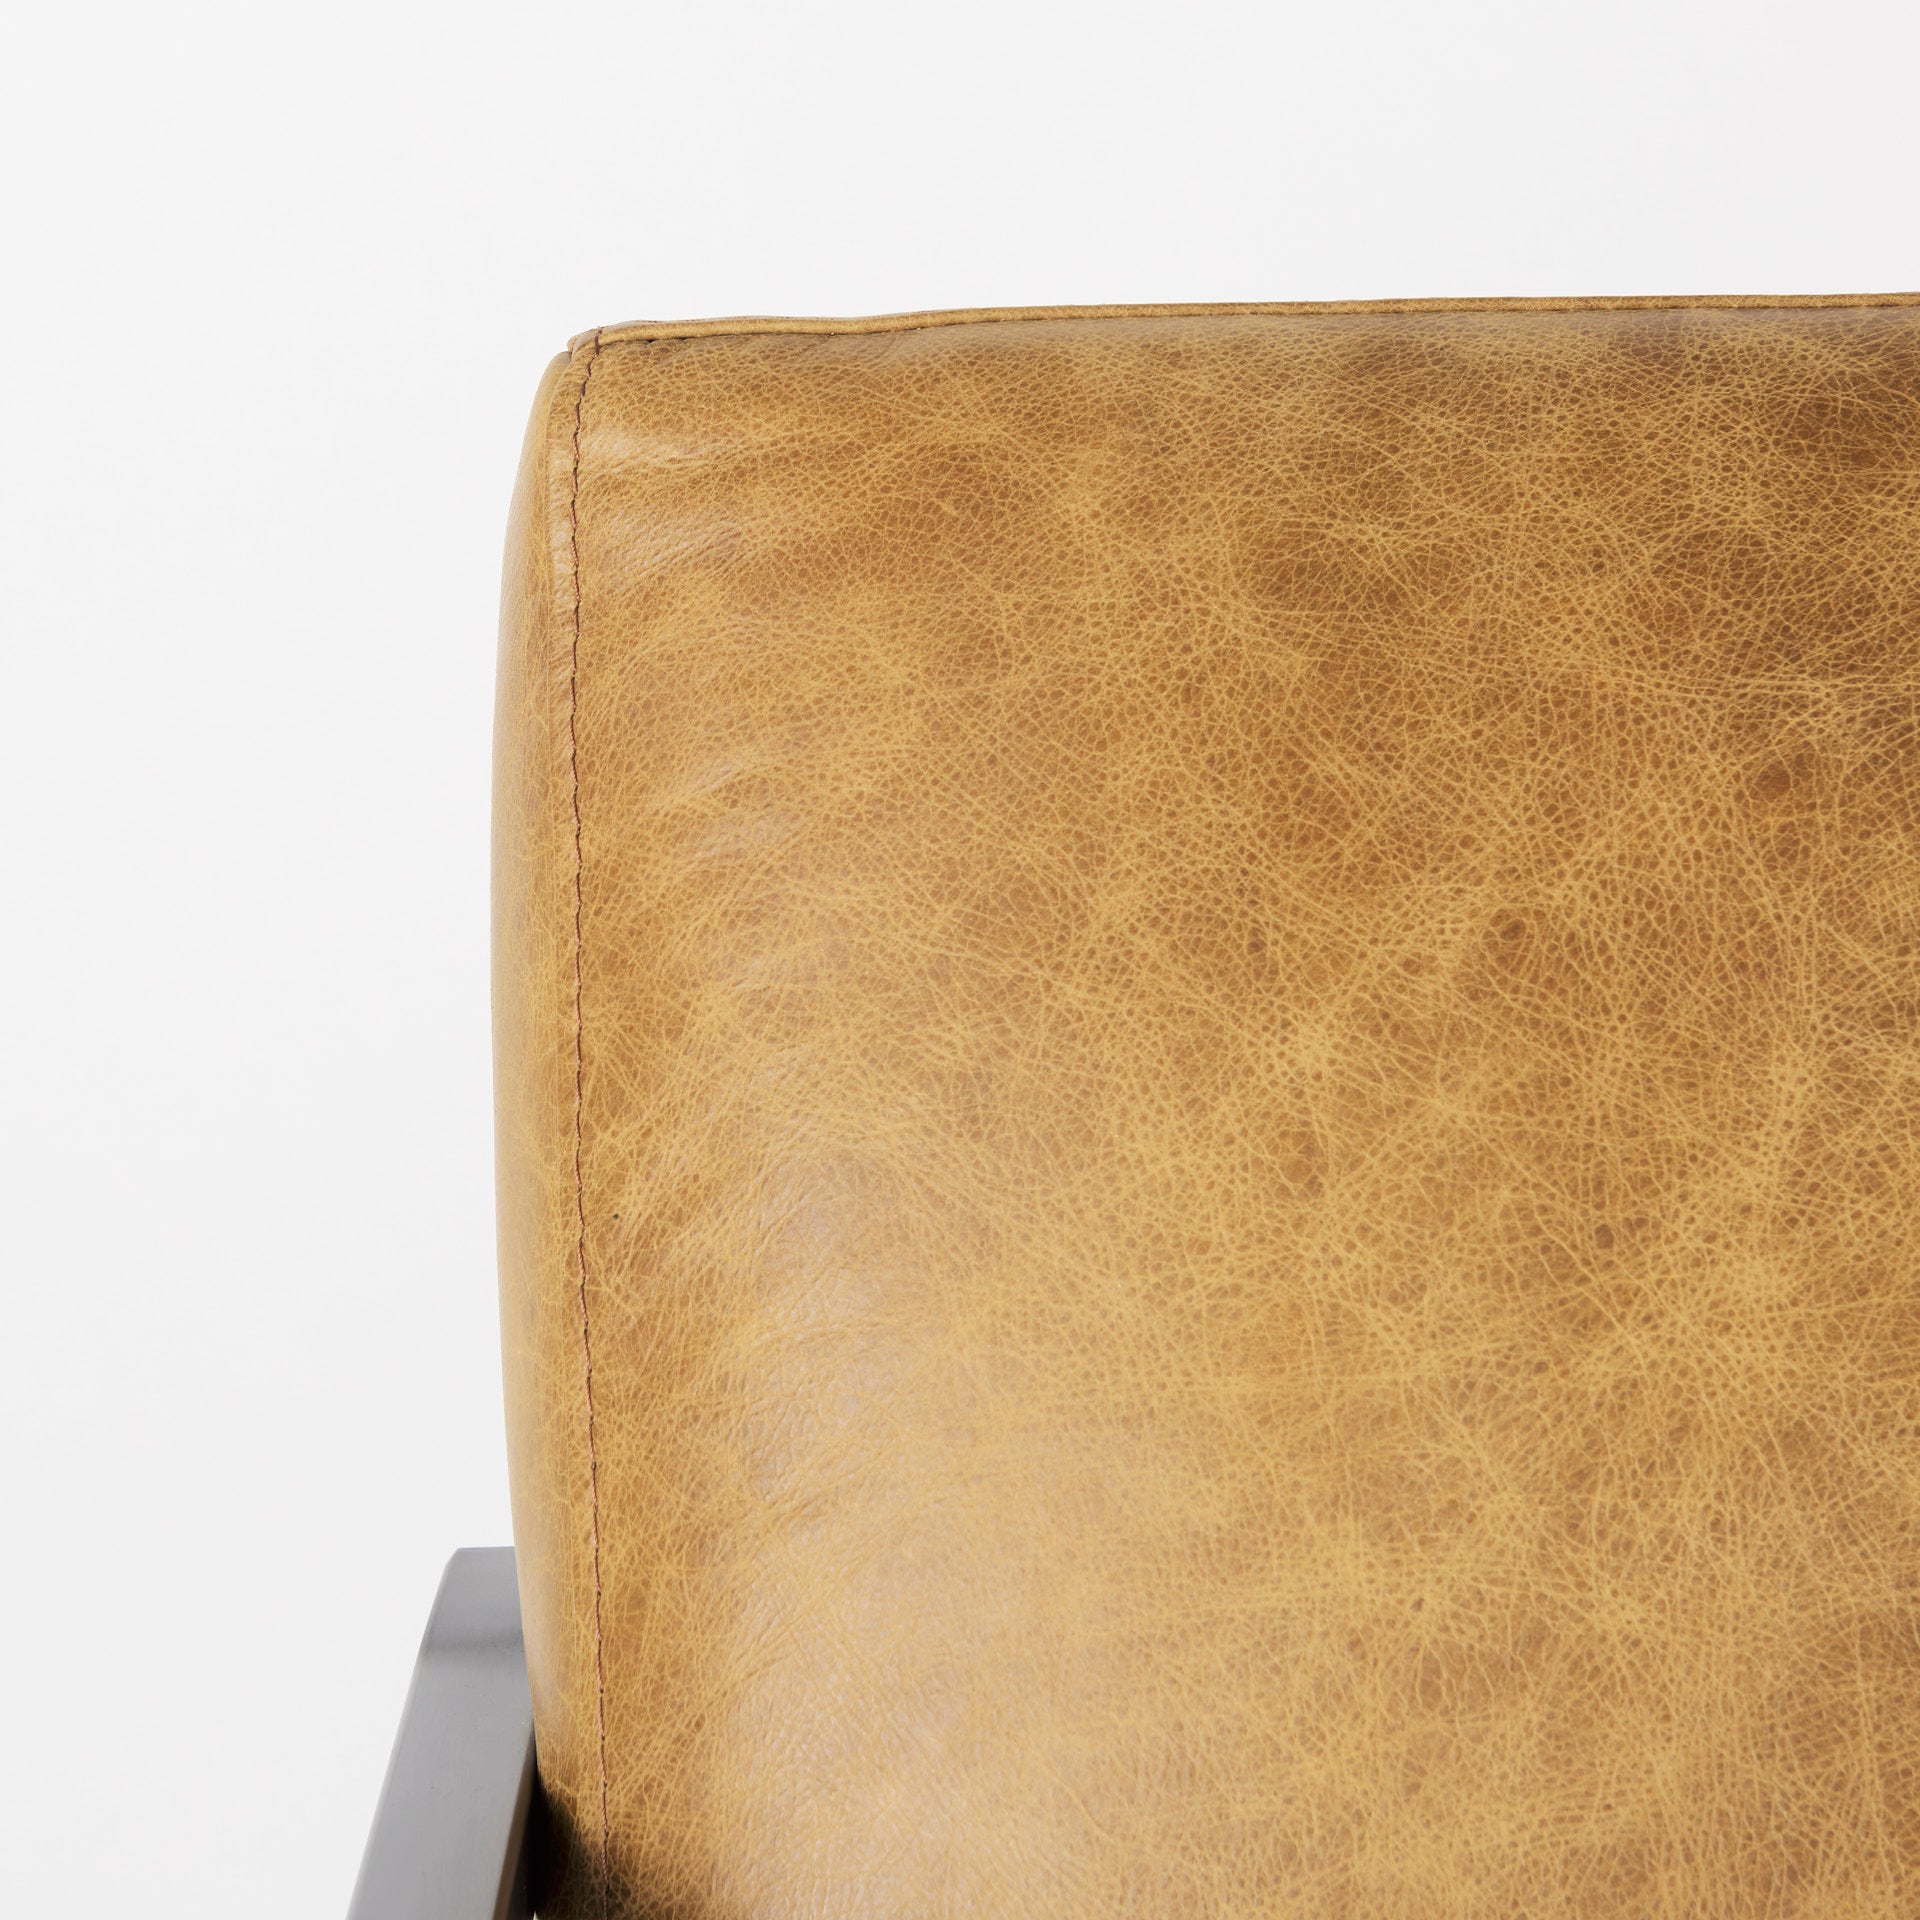 Armelle Accent Chair - Brown Leather